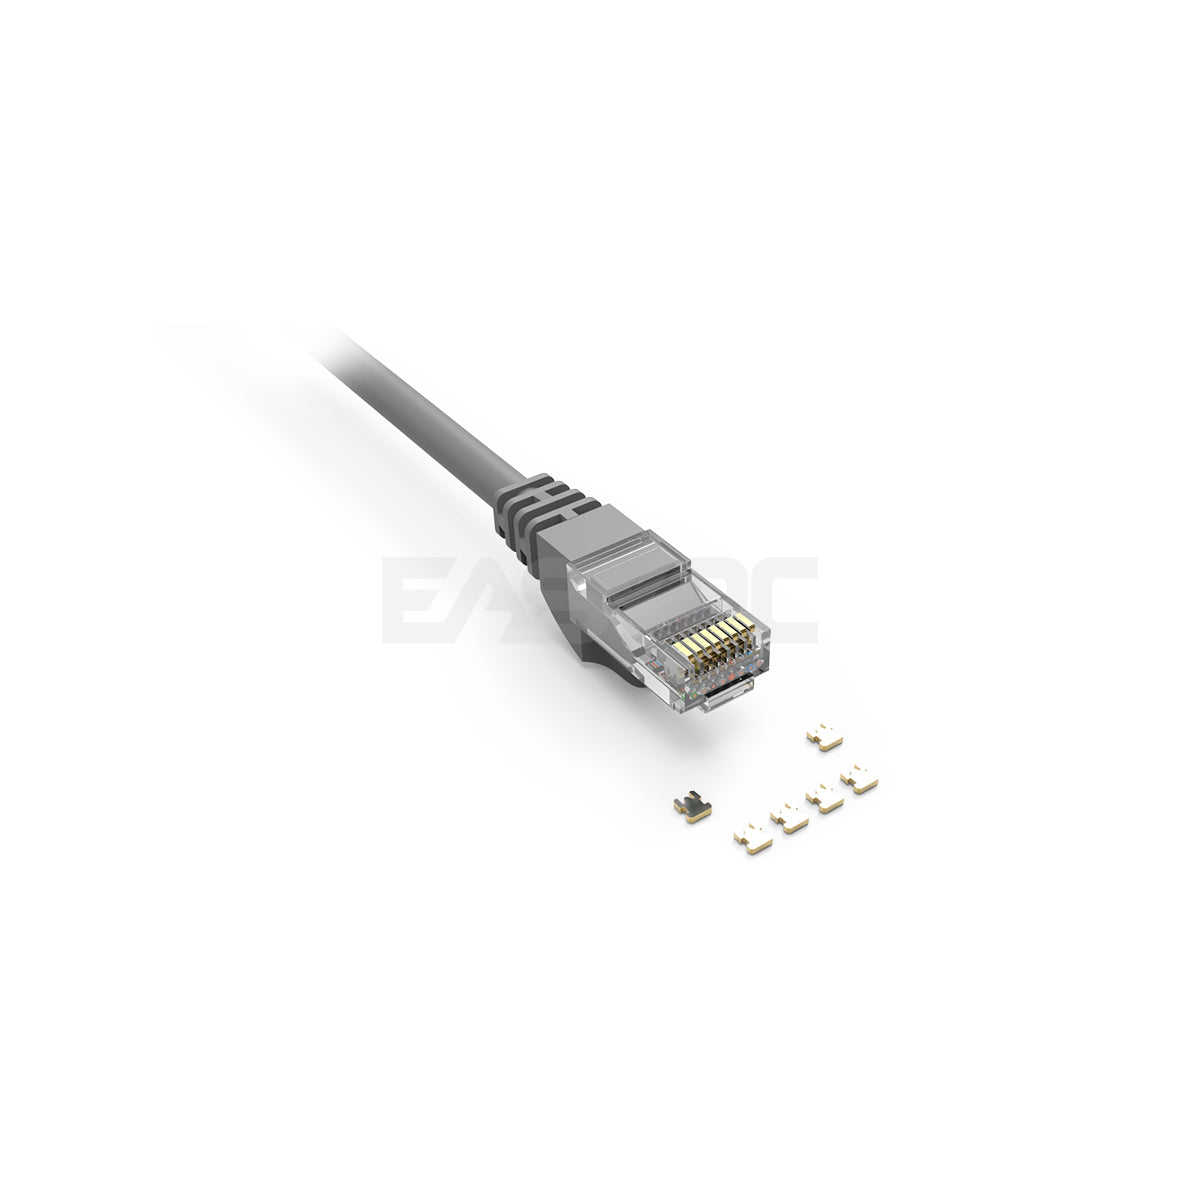 Ad-Link Ethernet Cable 10-Meters Cat5 Light Weight Convenient to Use Patch Cable Gray